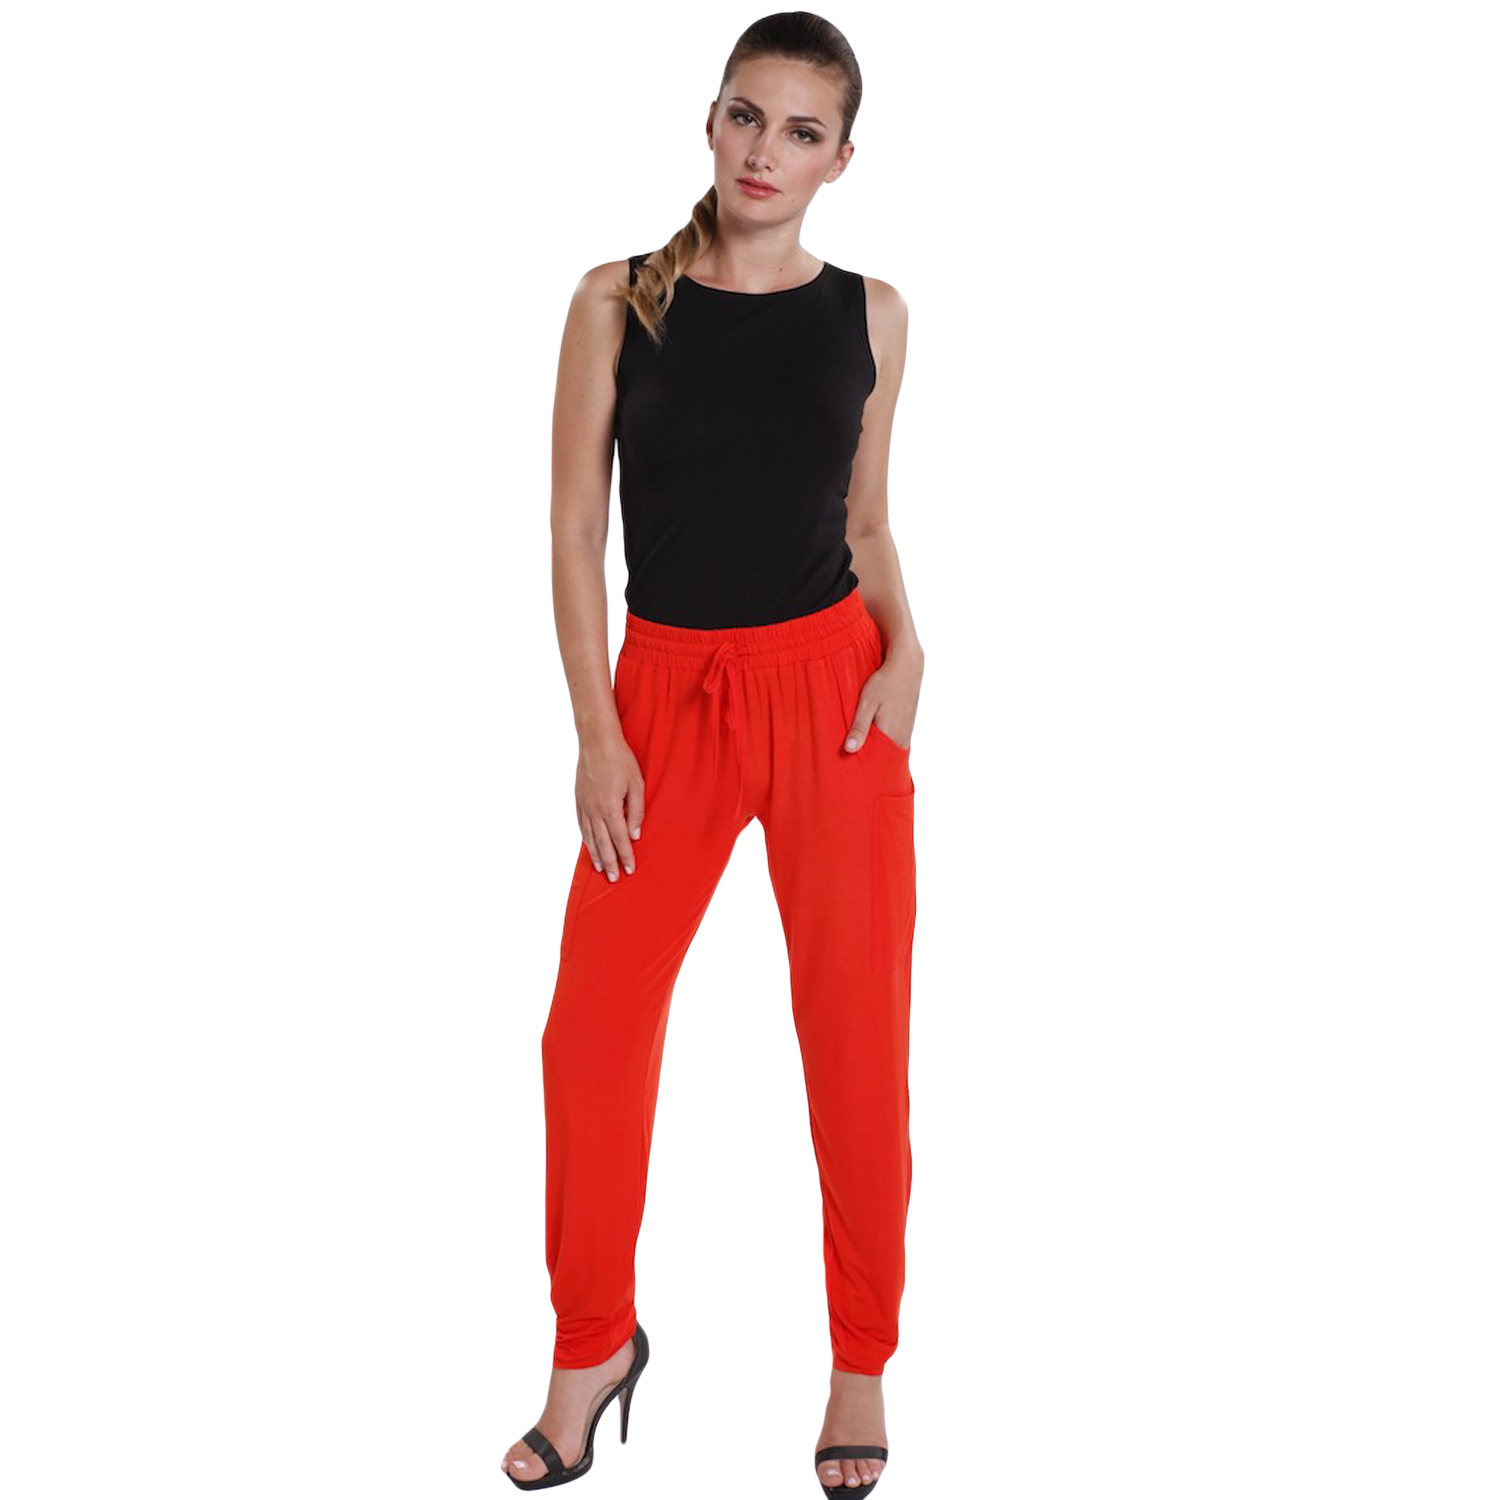 Tangerine easy fit pocket pants - hooked on bamboo